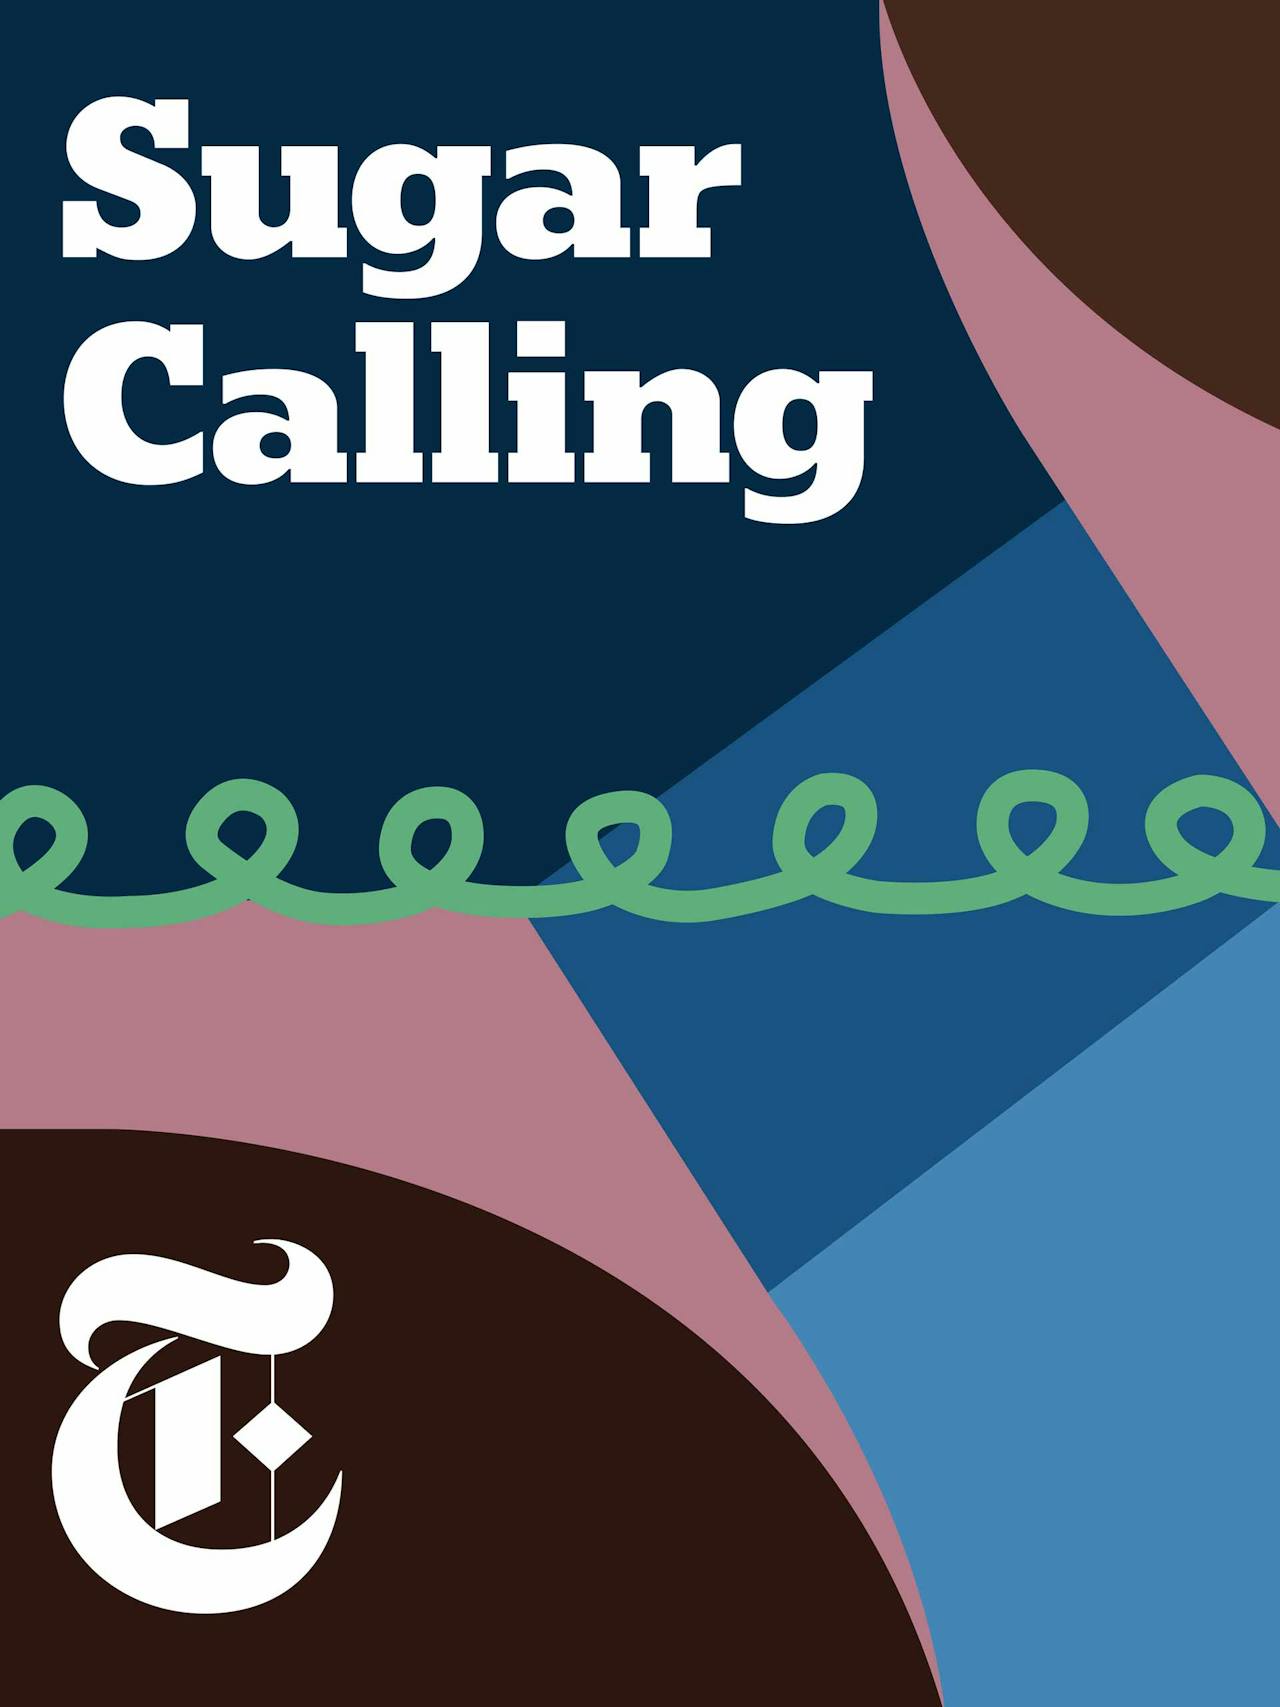 The New York Times podcast series Sugar Calling